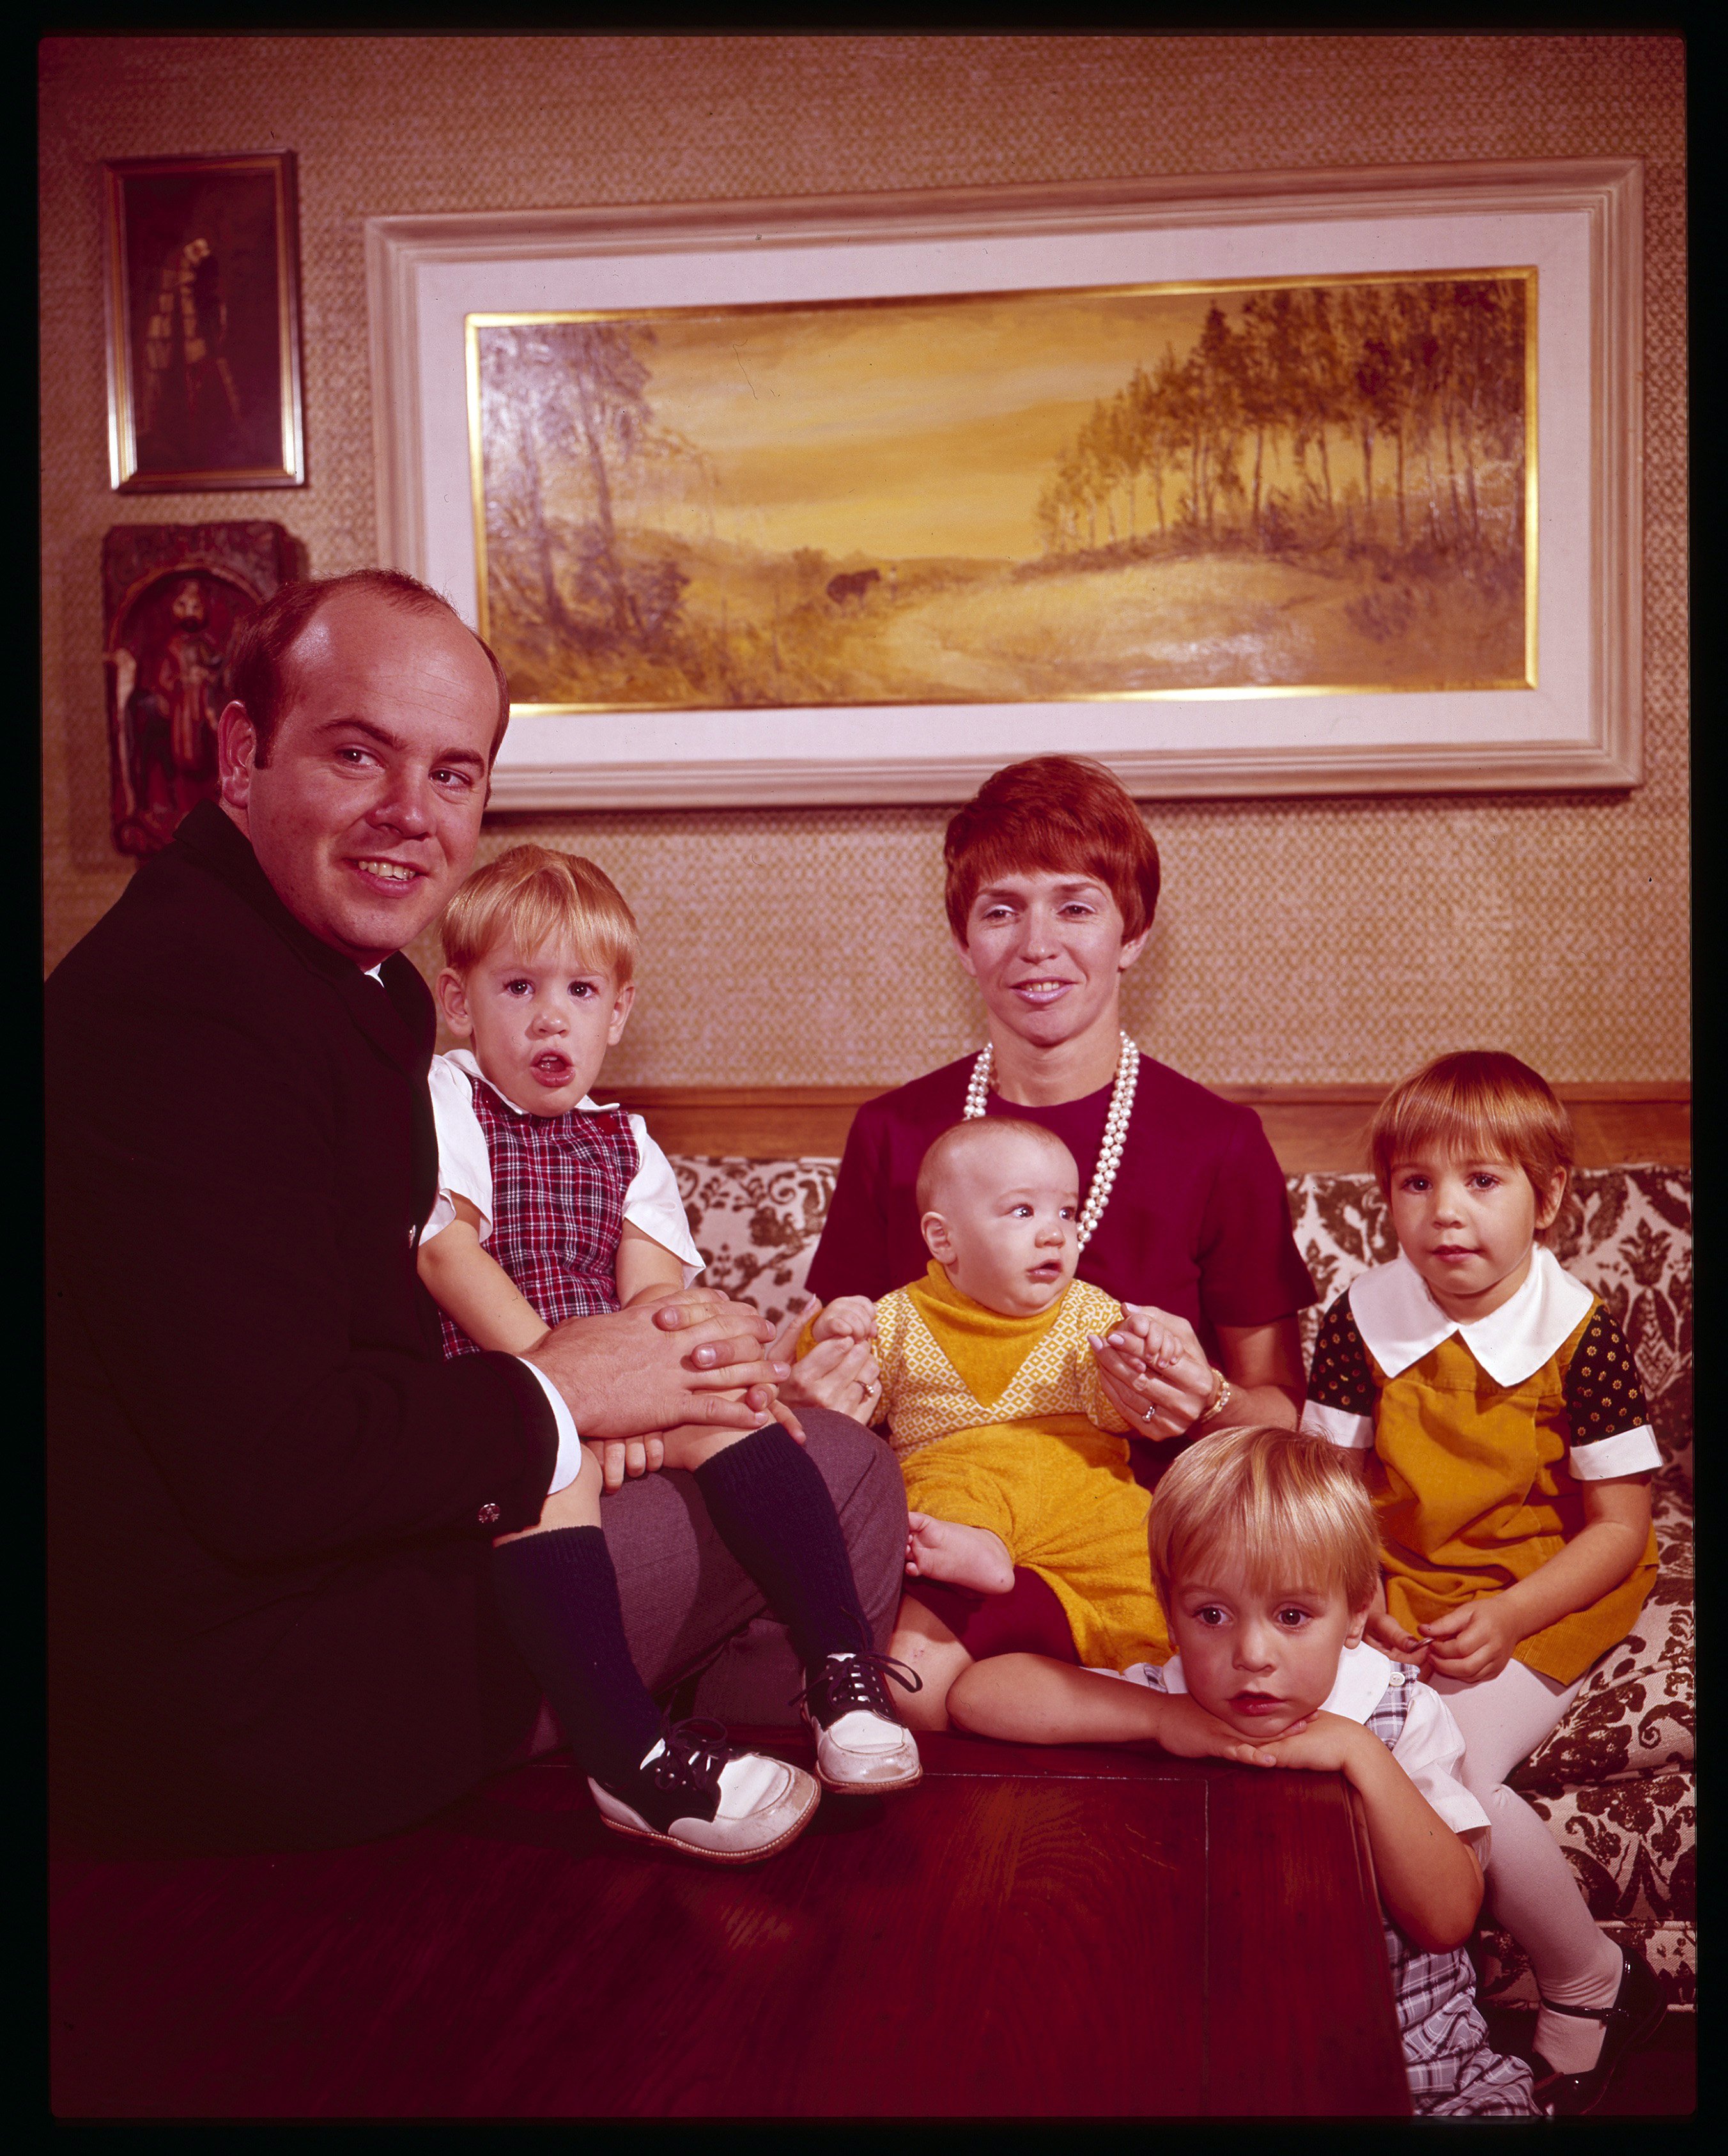 Tim Conway and his ex-wife Mary Anne Dalton photographed with their children Patrick, Jamie, Timmy and Kelly in 1967. | Source: Getty Images ,